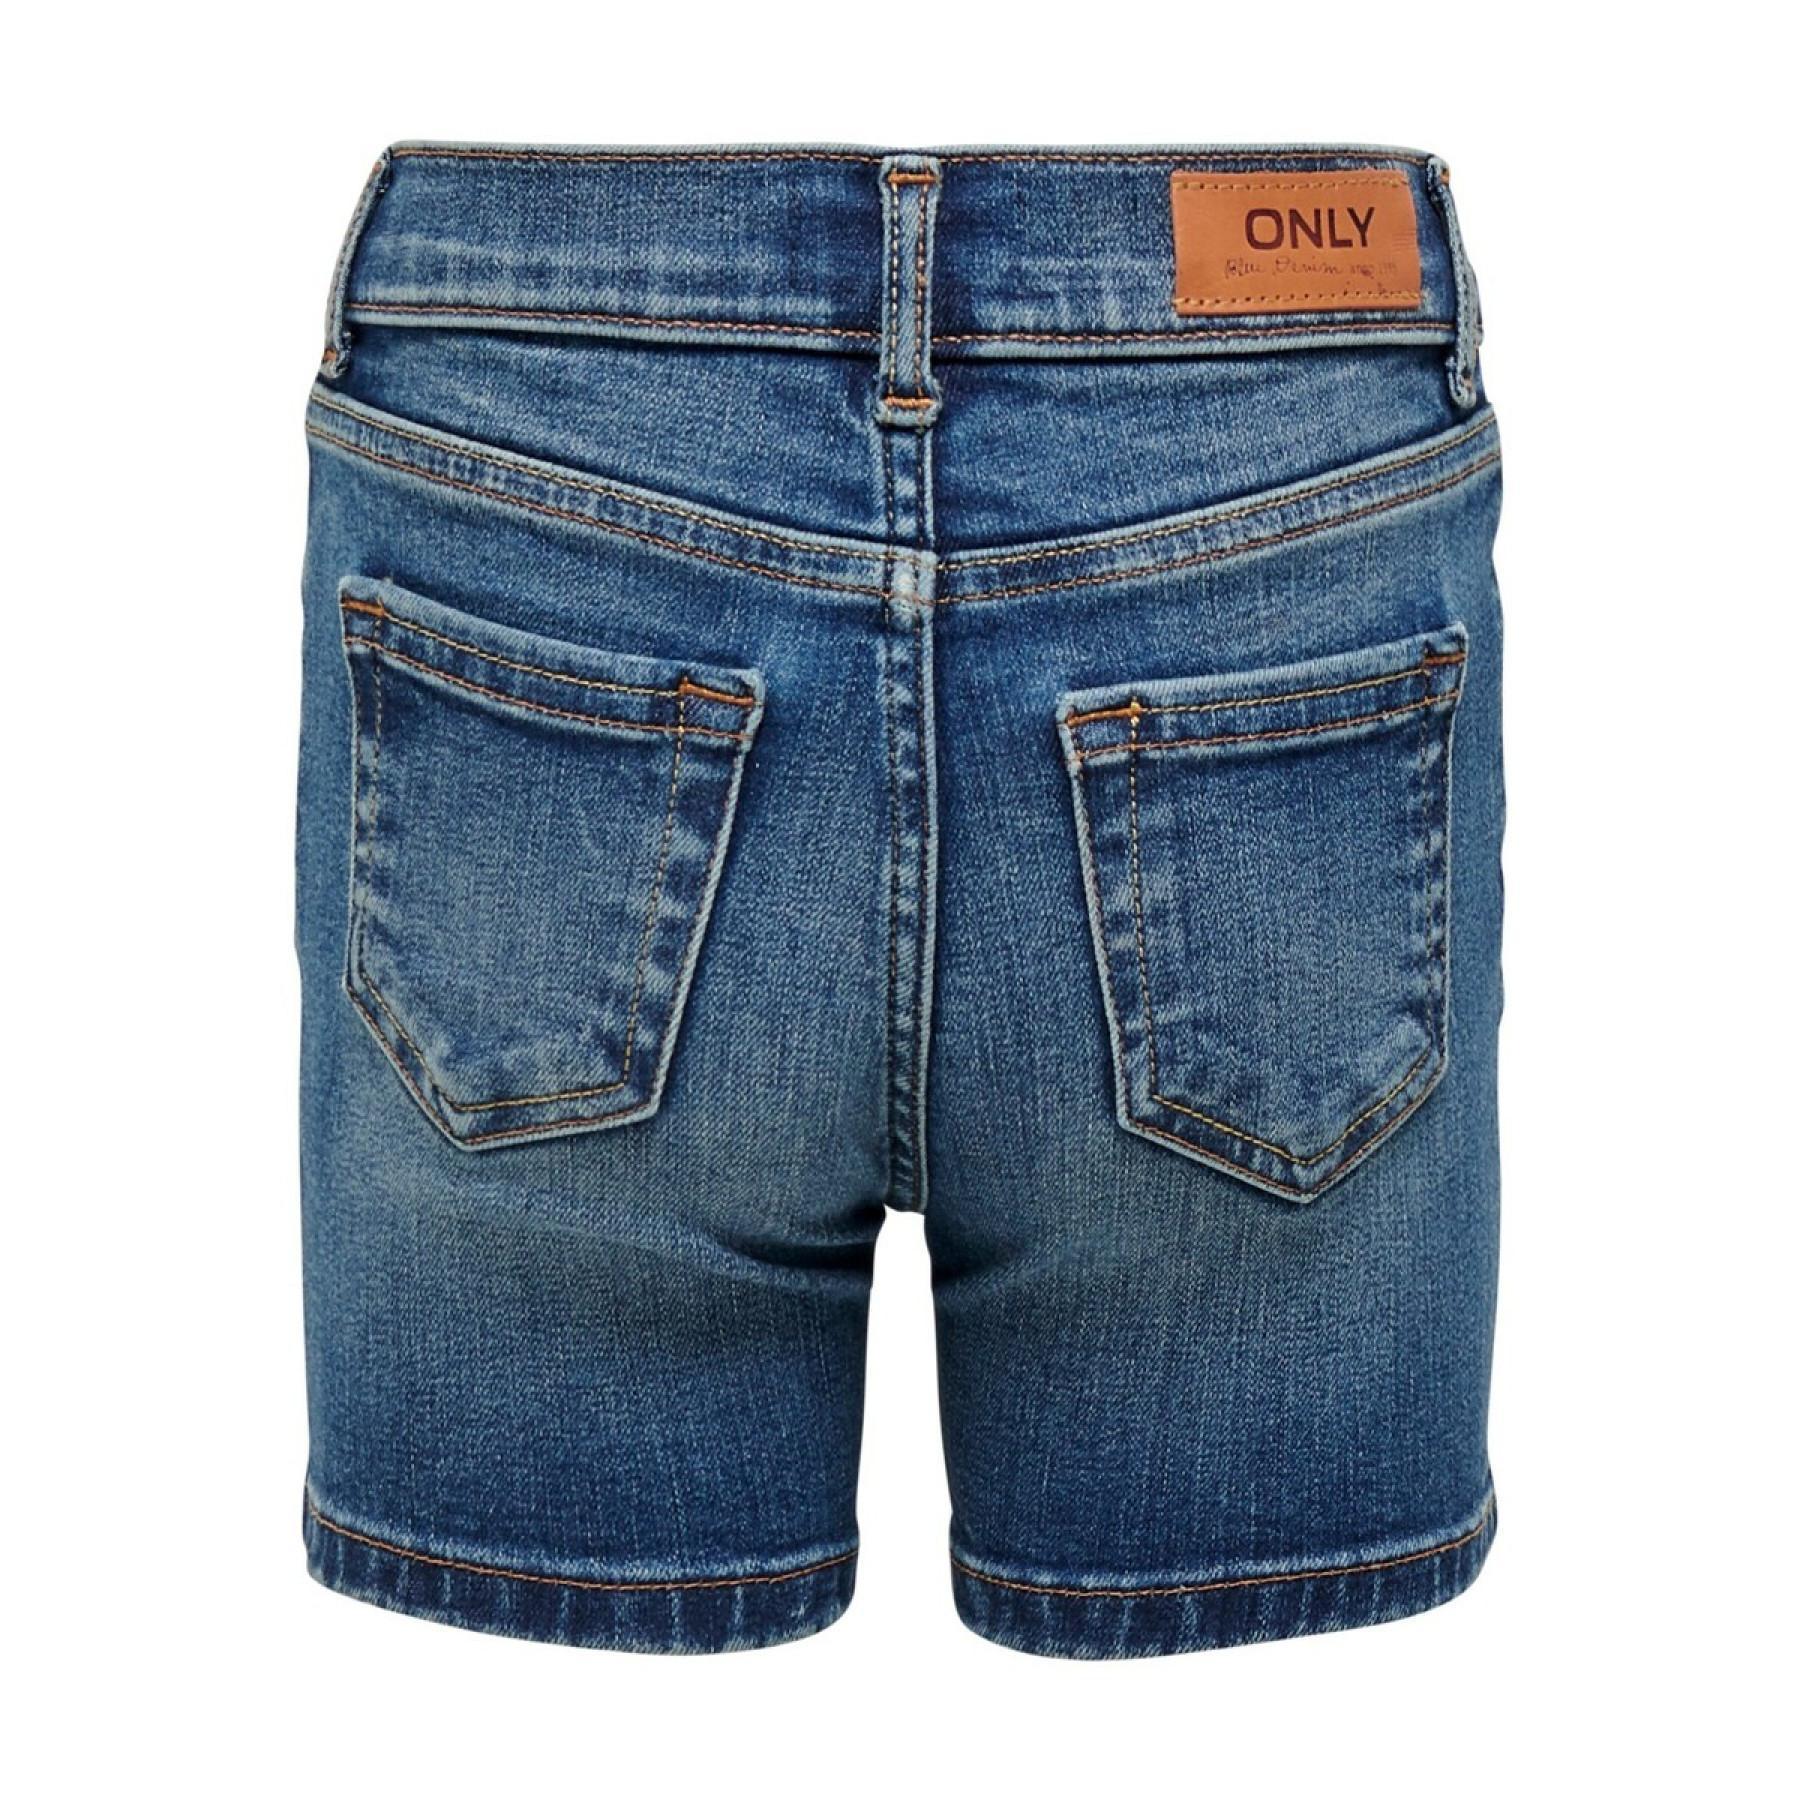 Girl's jeans shorts Only kids Blush 1303